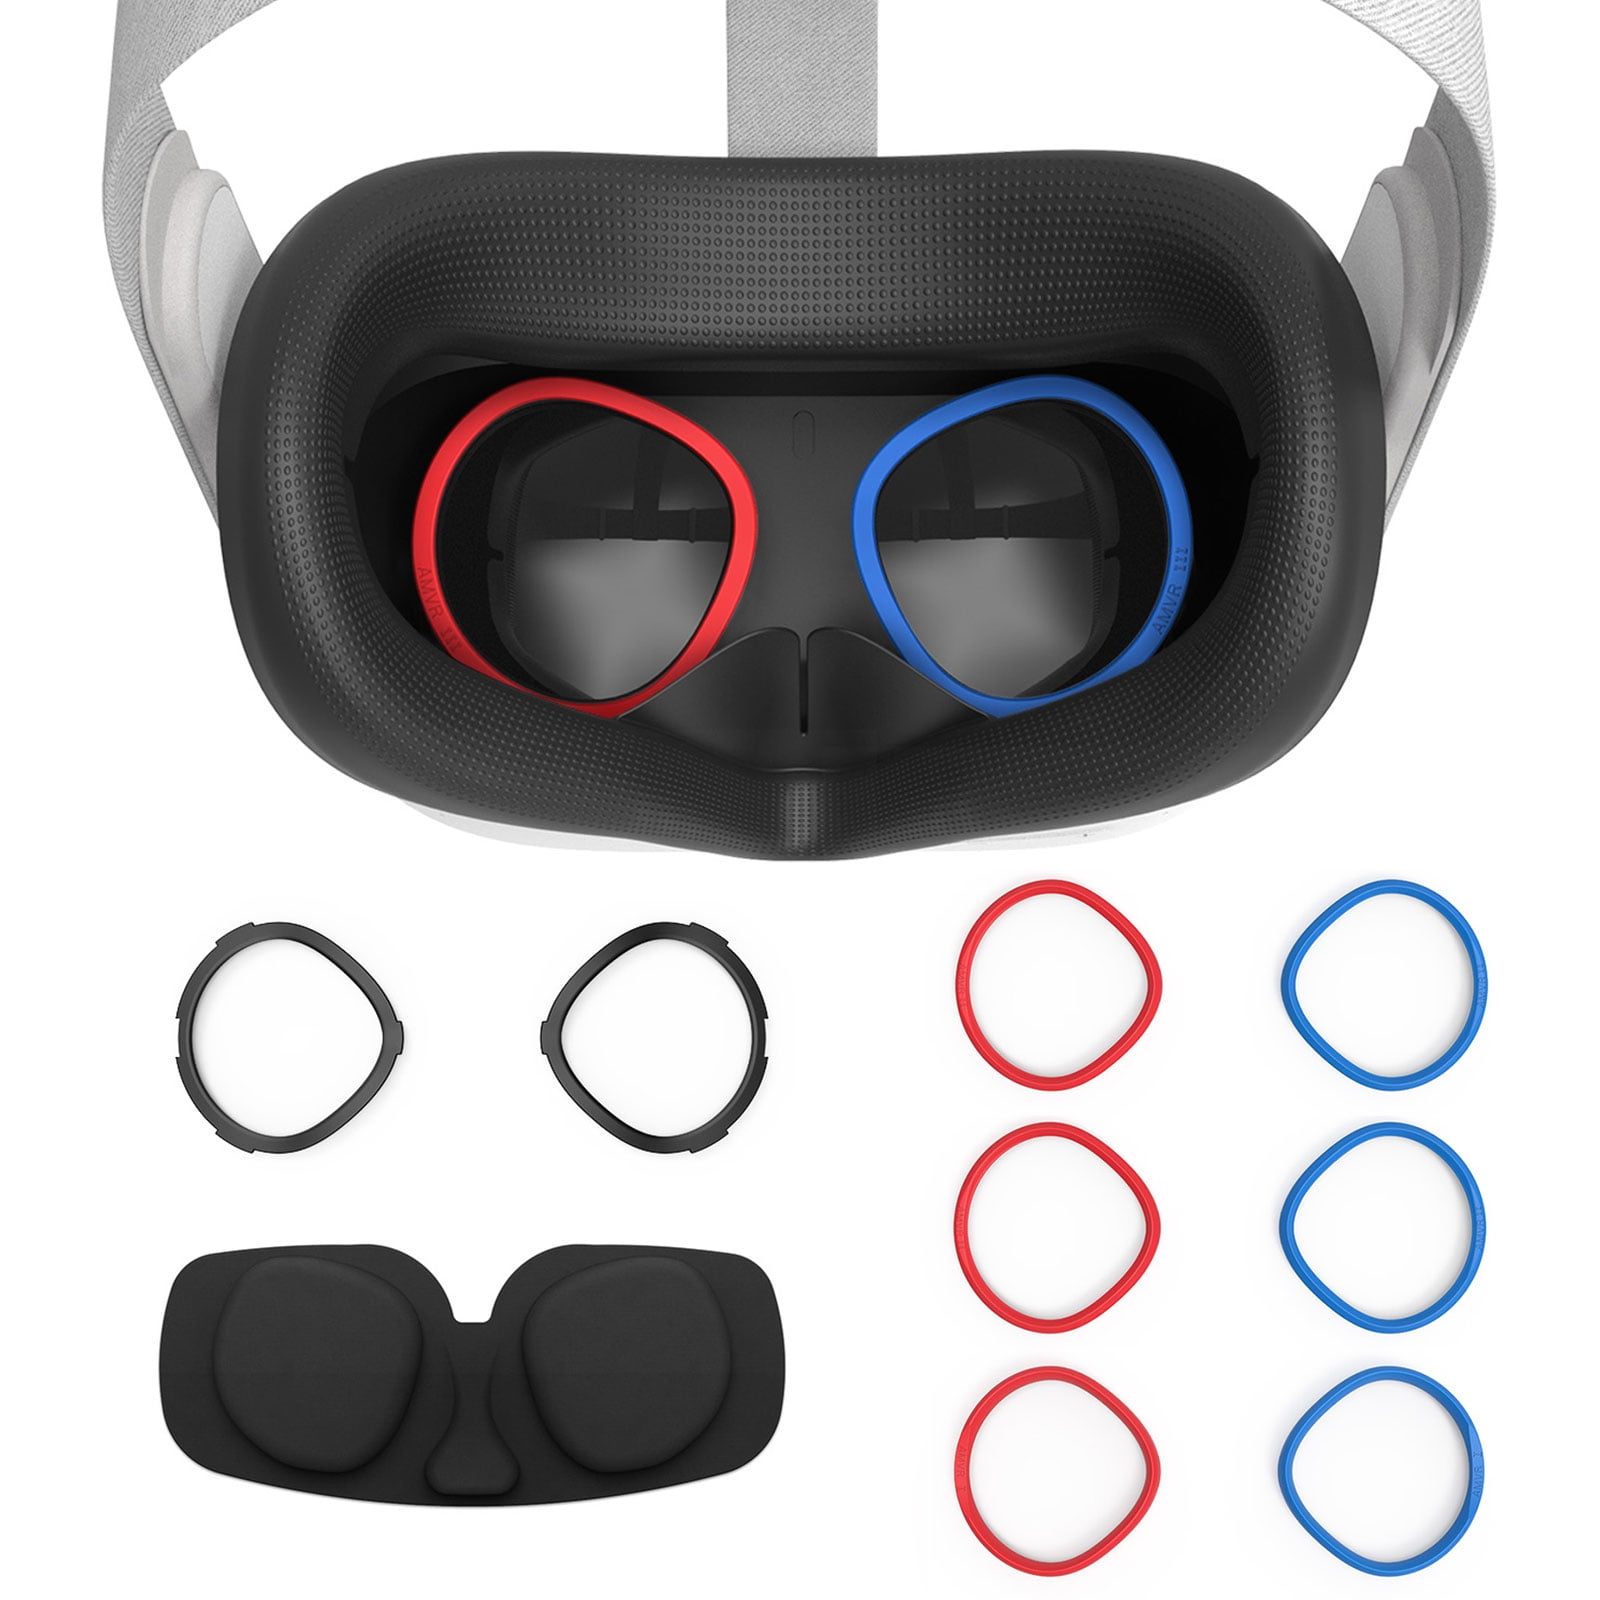 Silicone Lens Protect Cover Dust Proof Anti-Scratch VR Cover for Oculus Quest 2 VR Headset Red